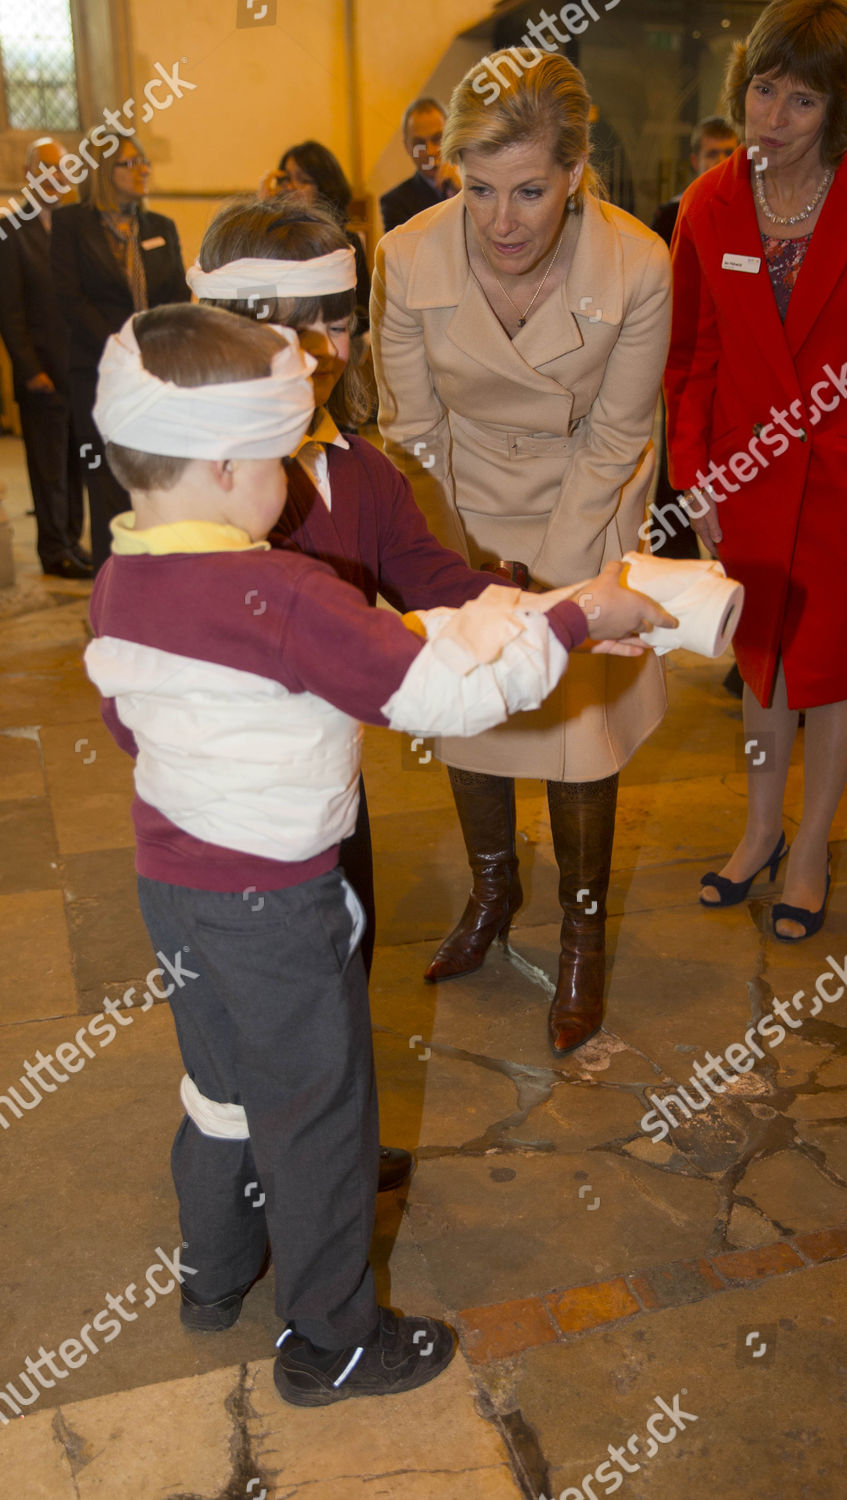 sophie-countess-of-wessex-visit-to-pact-parents-and-children-together-at-dorchester-abbey-britain-shutterstock-editorial-3565183b.jpg